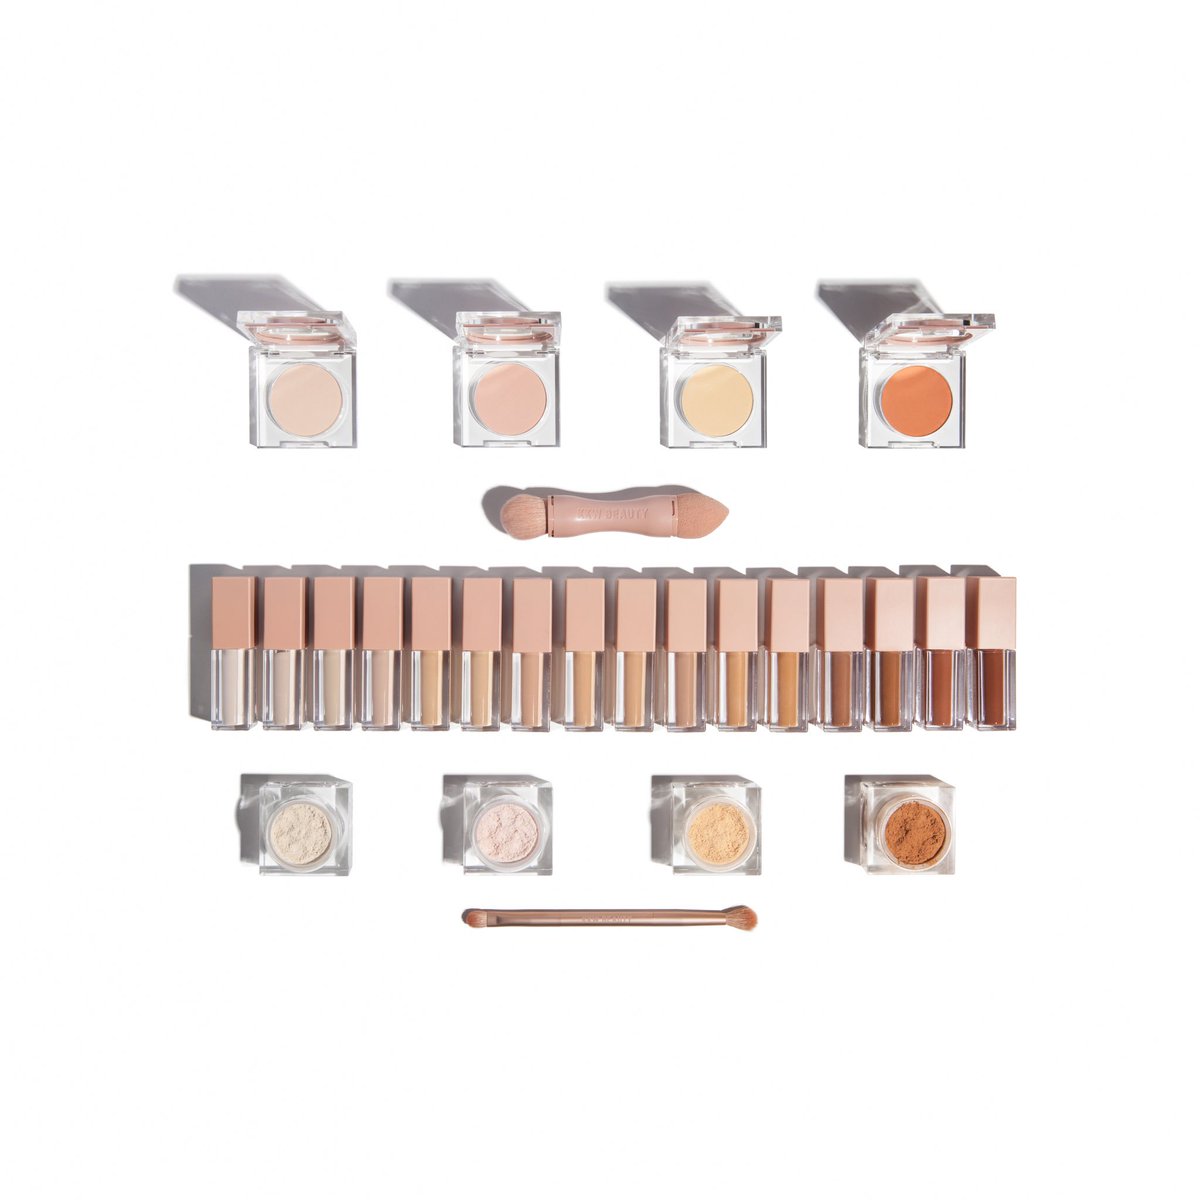 Concealer restock AND #KKWXARGENIS are both happening at 12PM PST today at https://t.co/PoBZ3bhjs8! https://t.co/LDQBnu4Czf